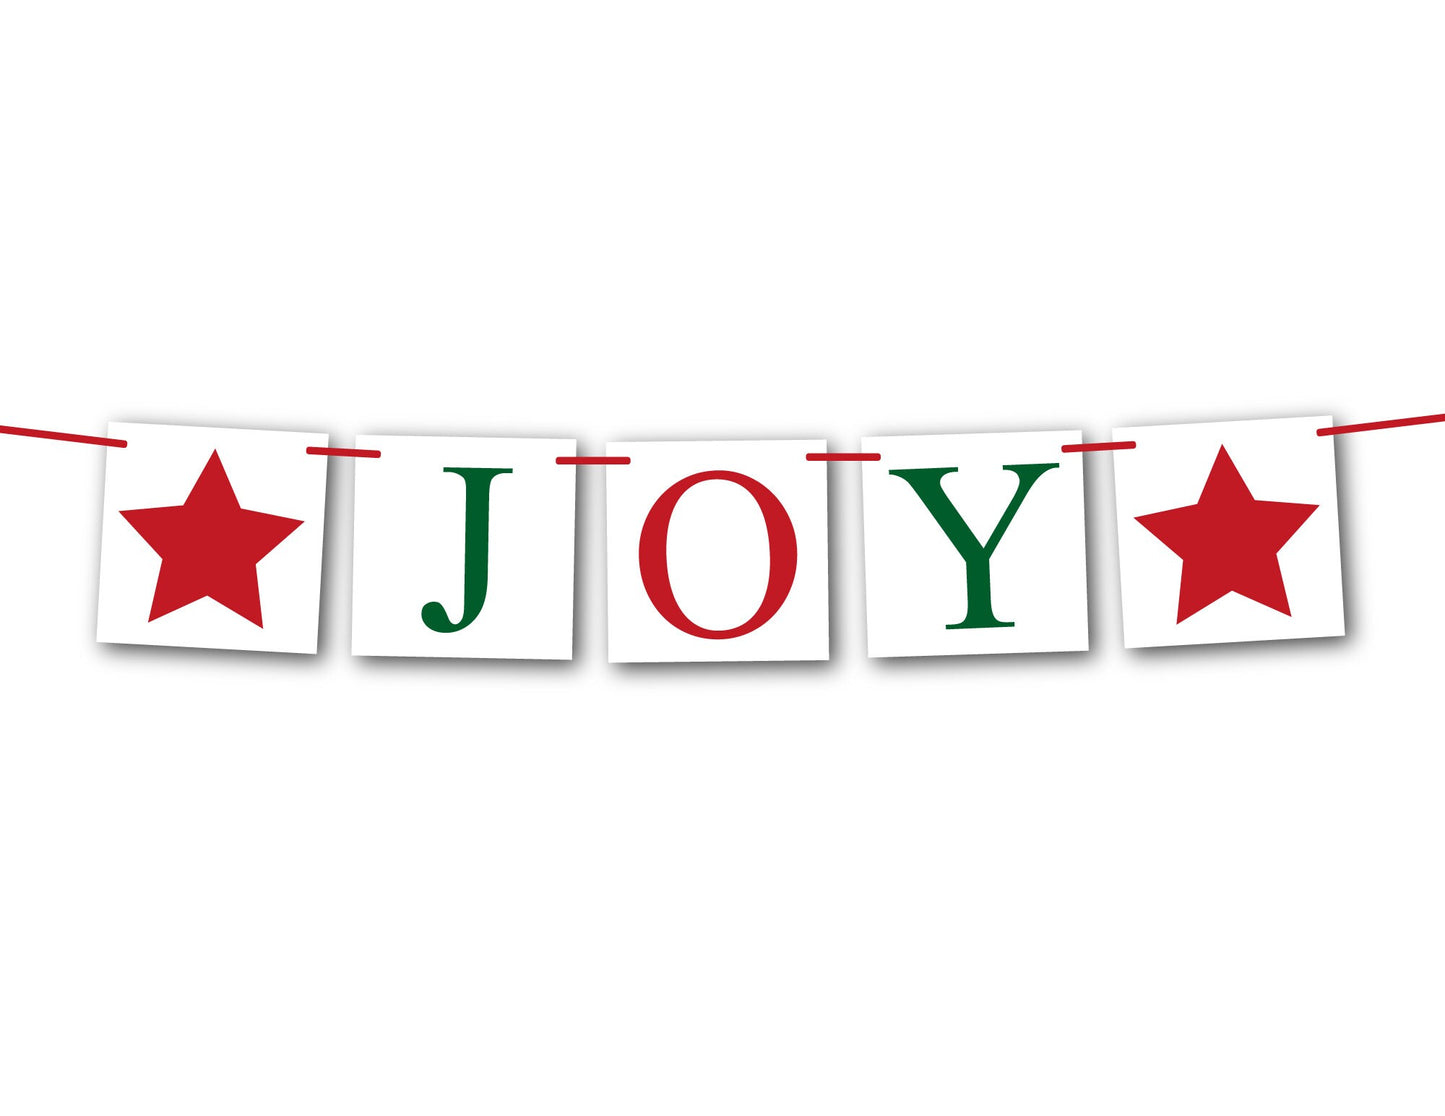 Joy Banner, Christmas banner, festive red and green Christmas decorations, star decor, joy to the world bunting, holiday mantel garland